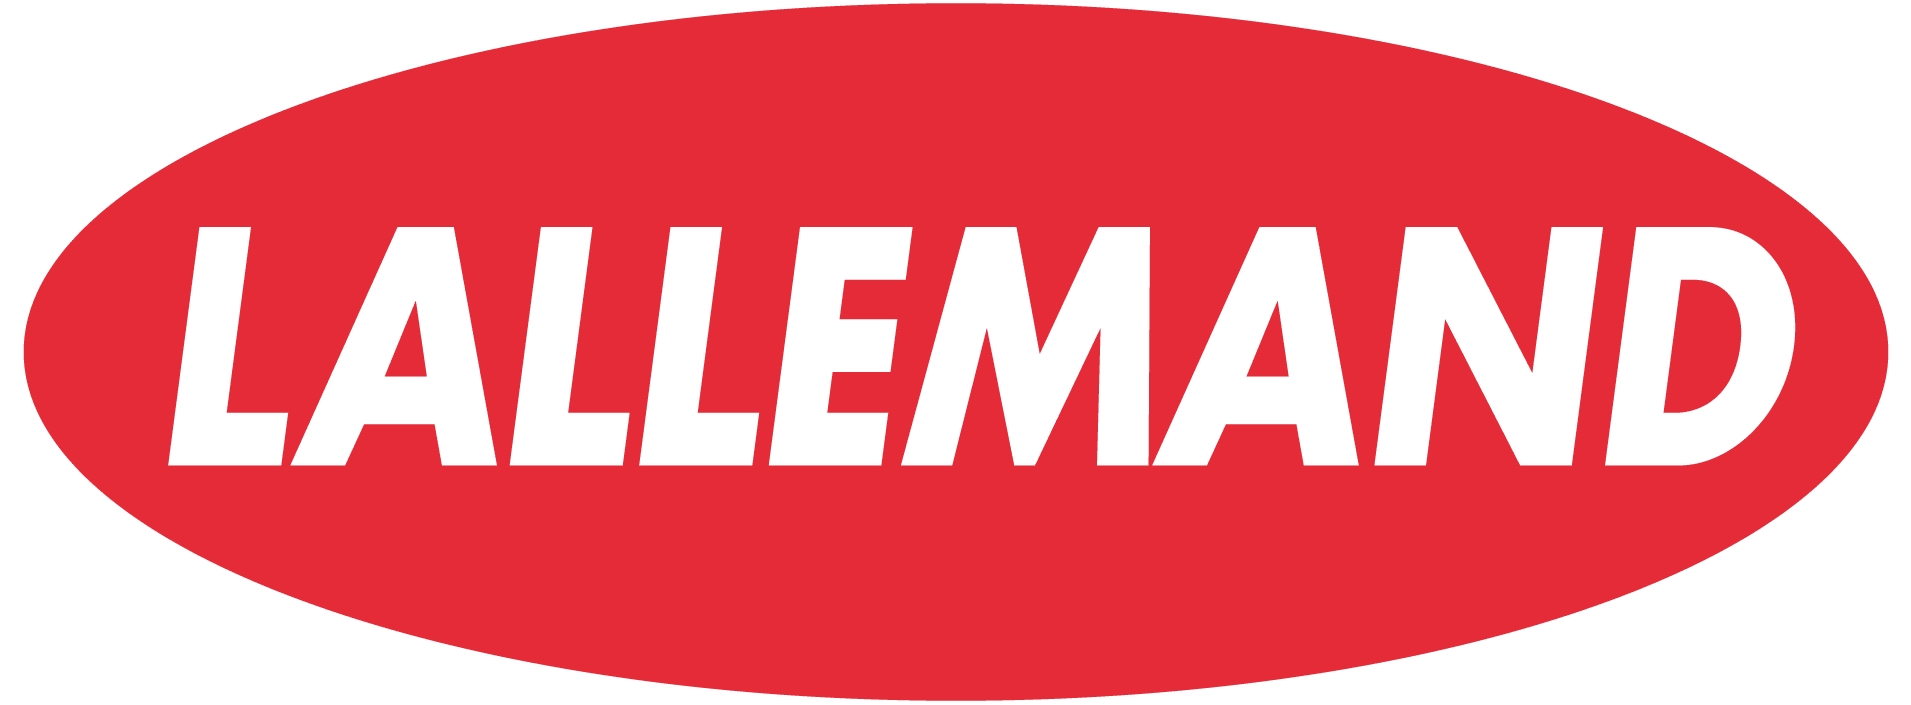 Halal Certificate - Lallemand